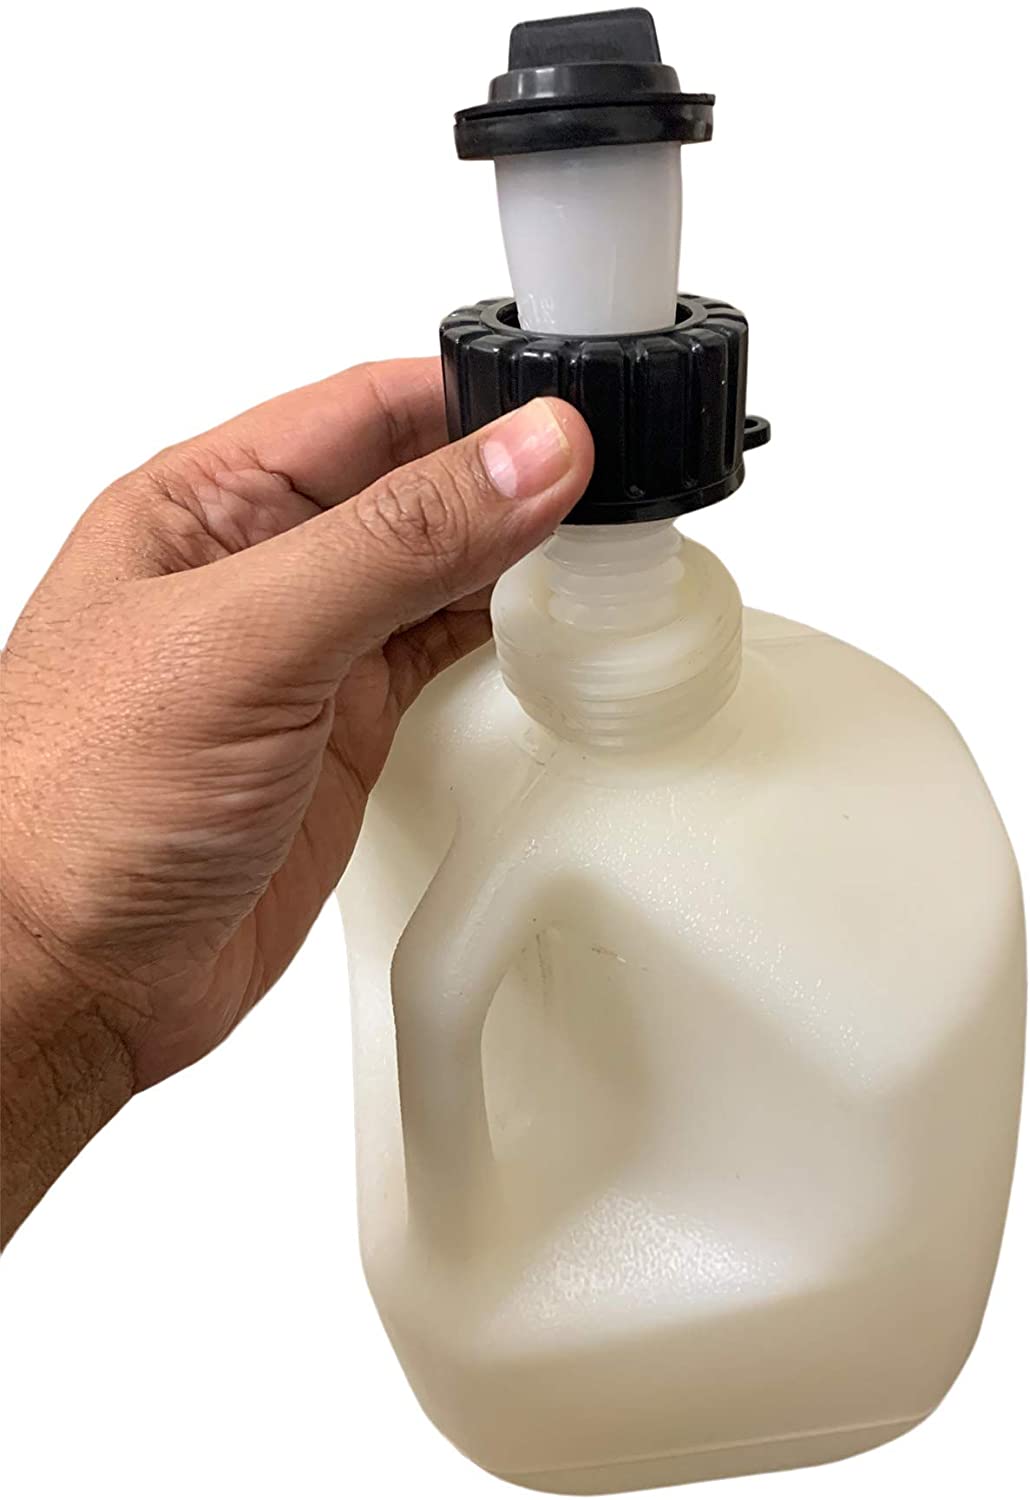 1 gallon water bottle - gallon water bottle - big water bottle - 1 gallon water jug - 1 gallon water bottle -  1 gallon gas can 14.99 freeshipping - Kool Products